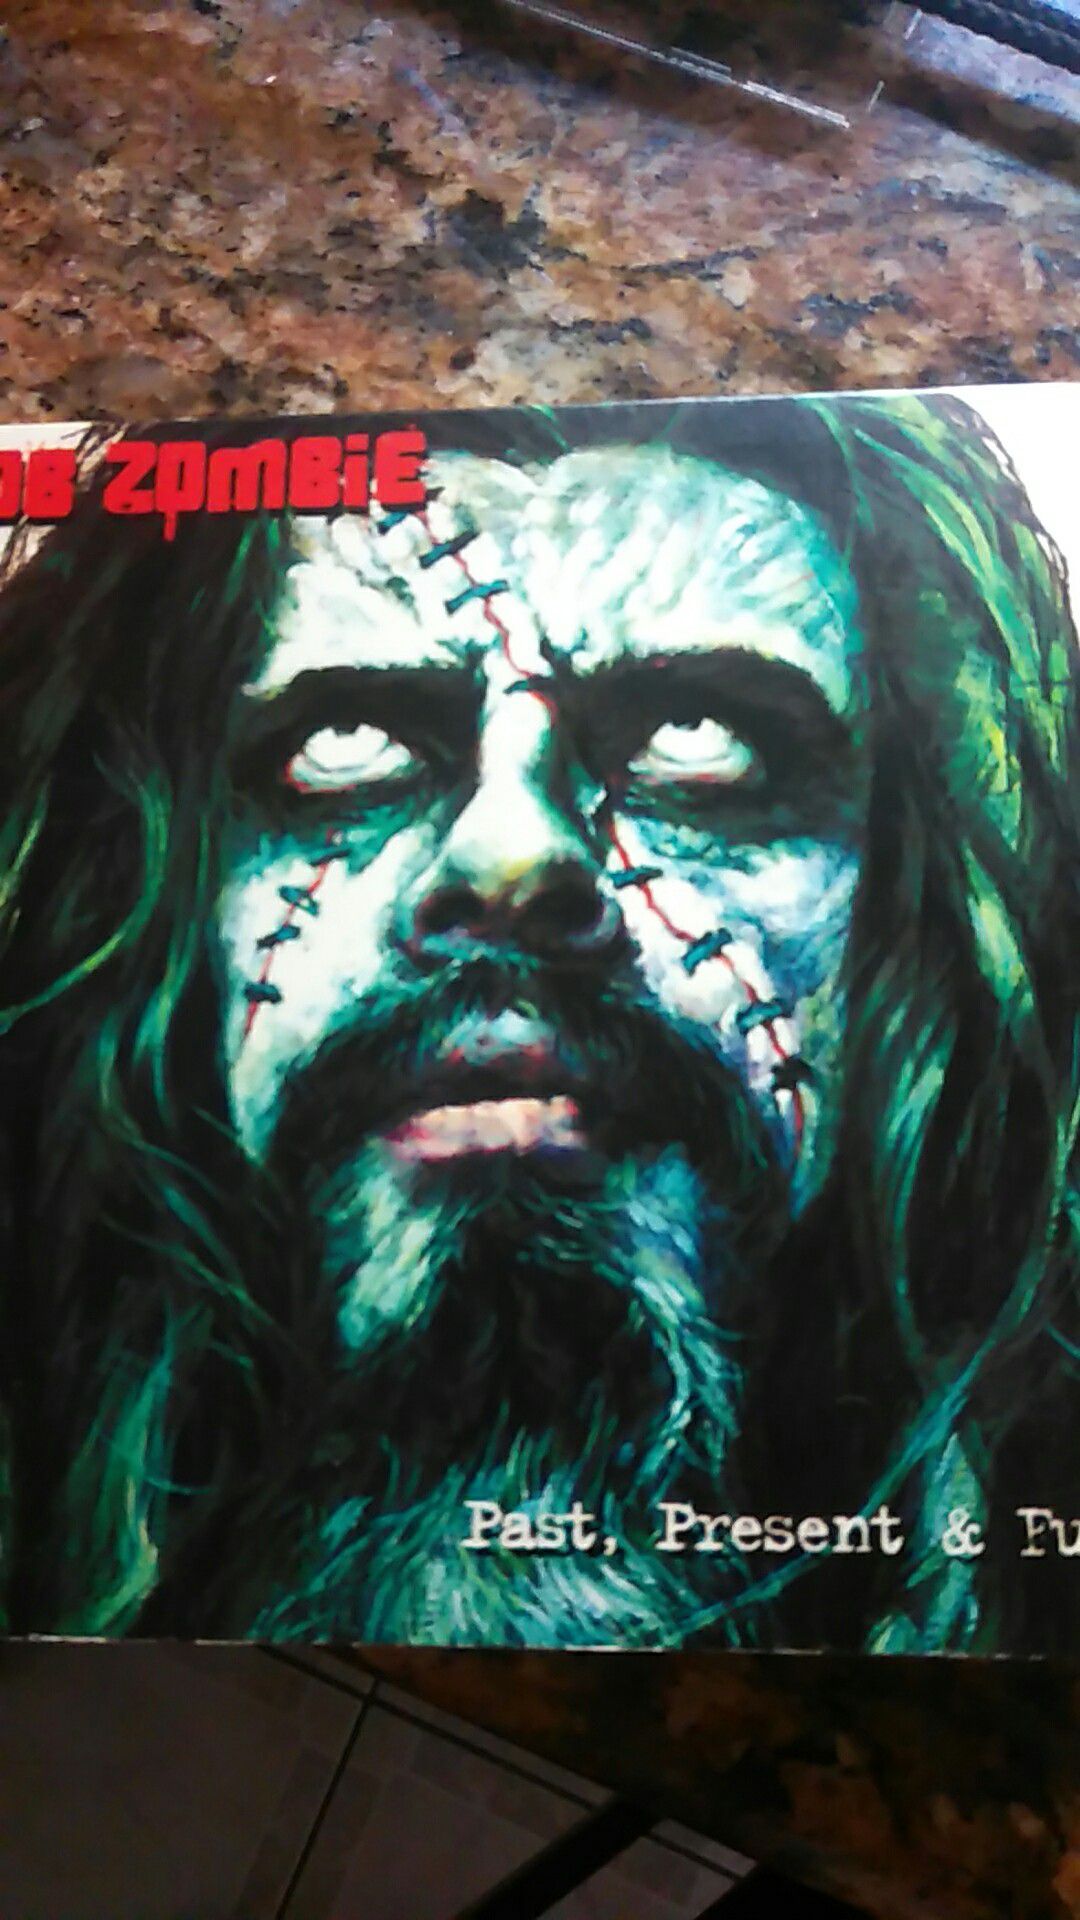 Rob Zombie Music and Video CD